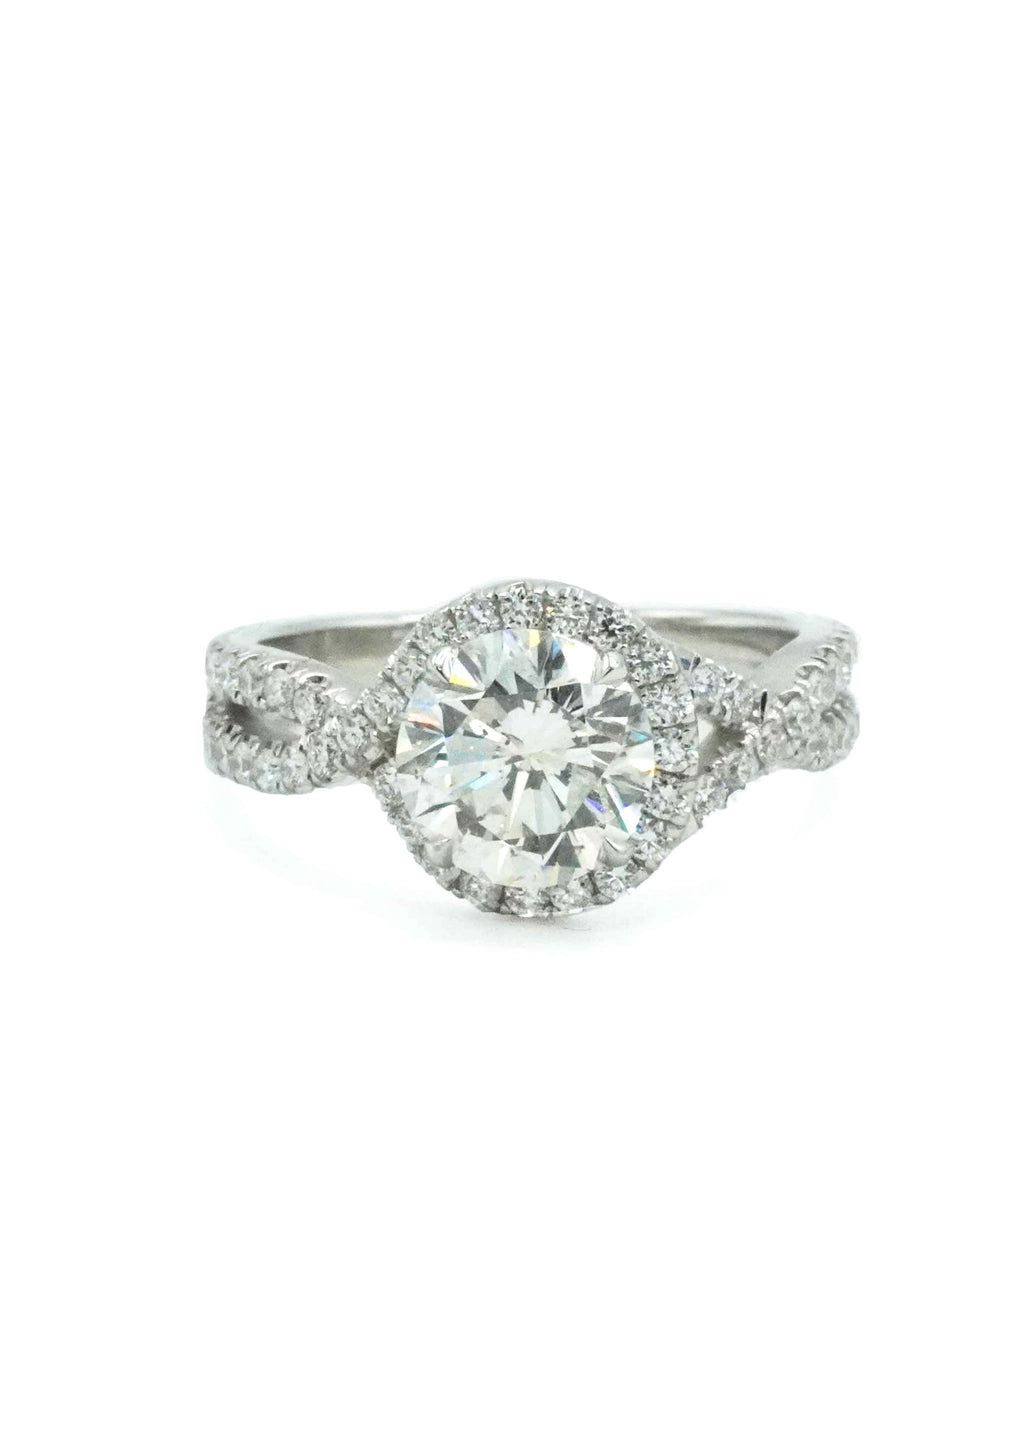 Engagement Rings Under $15,000: The Ultimate Buying Guide | Ritani